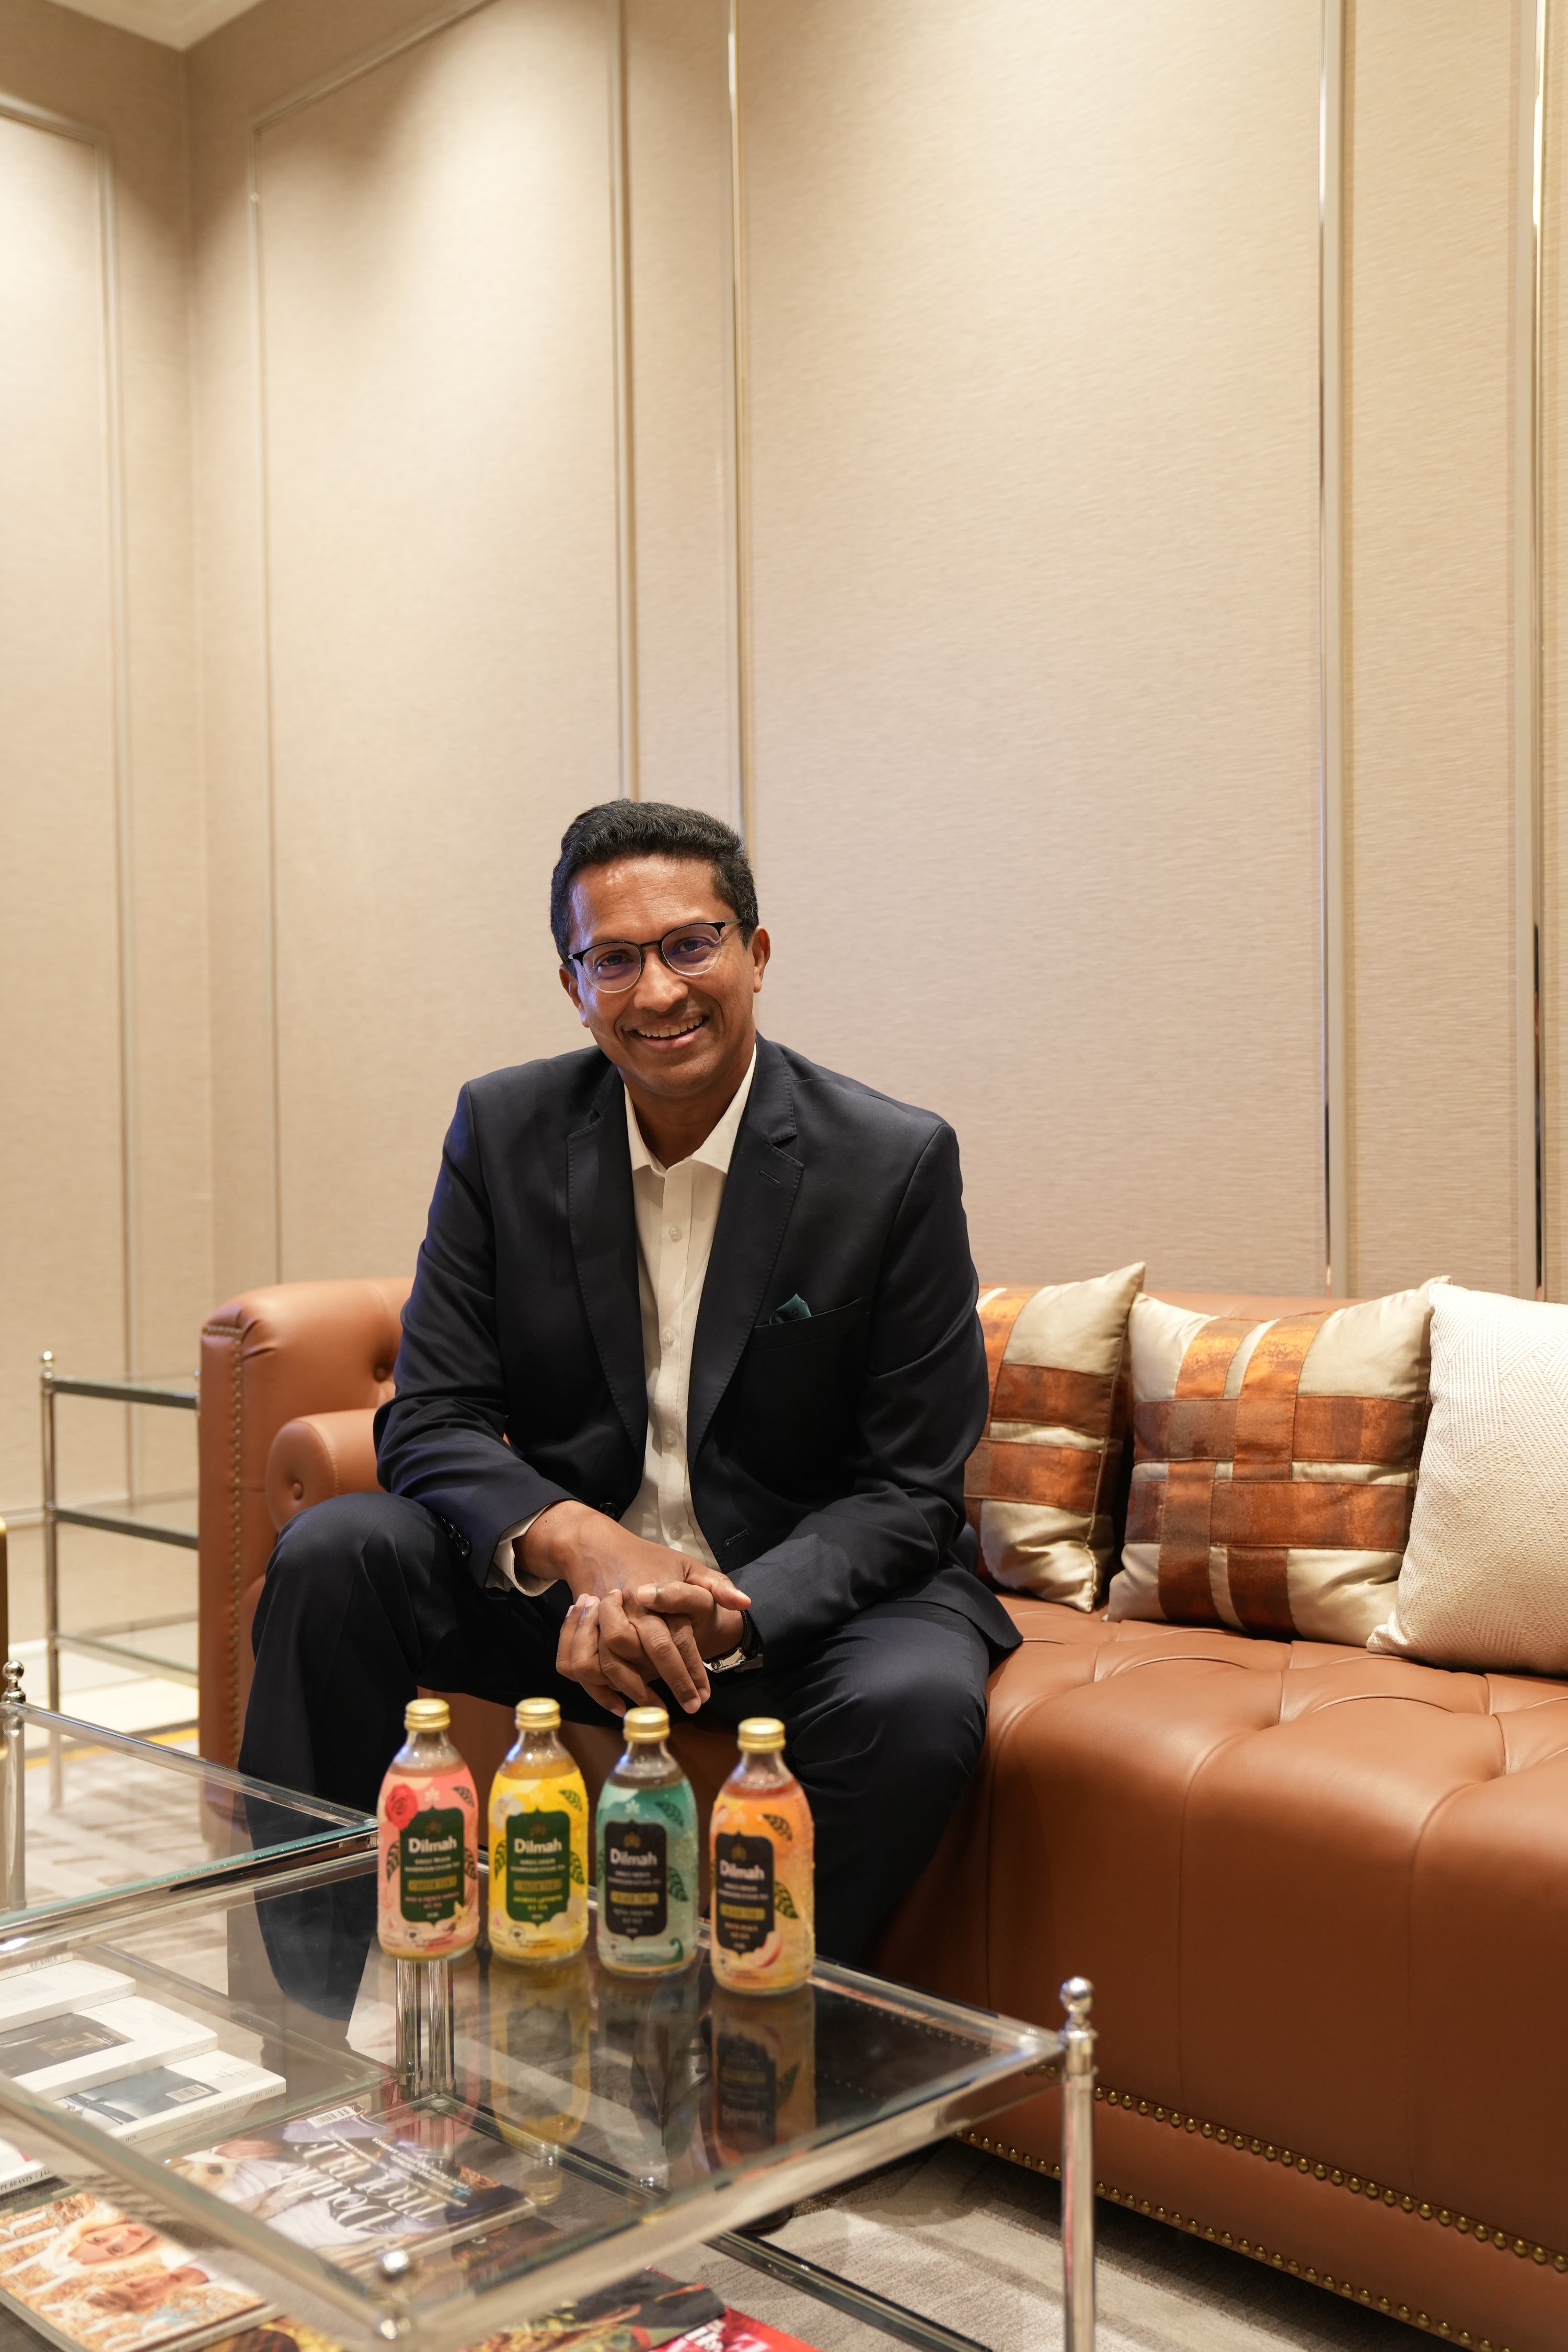 Influence: Dilmah Tea's CEO Dilhan C. Fernando on business leaders and social reform